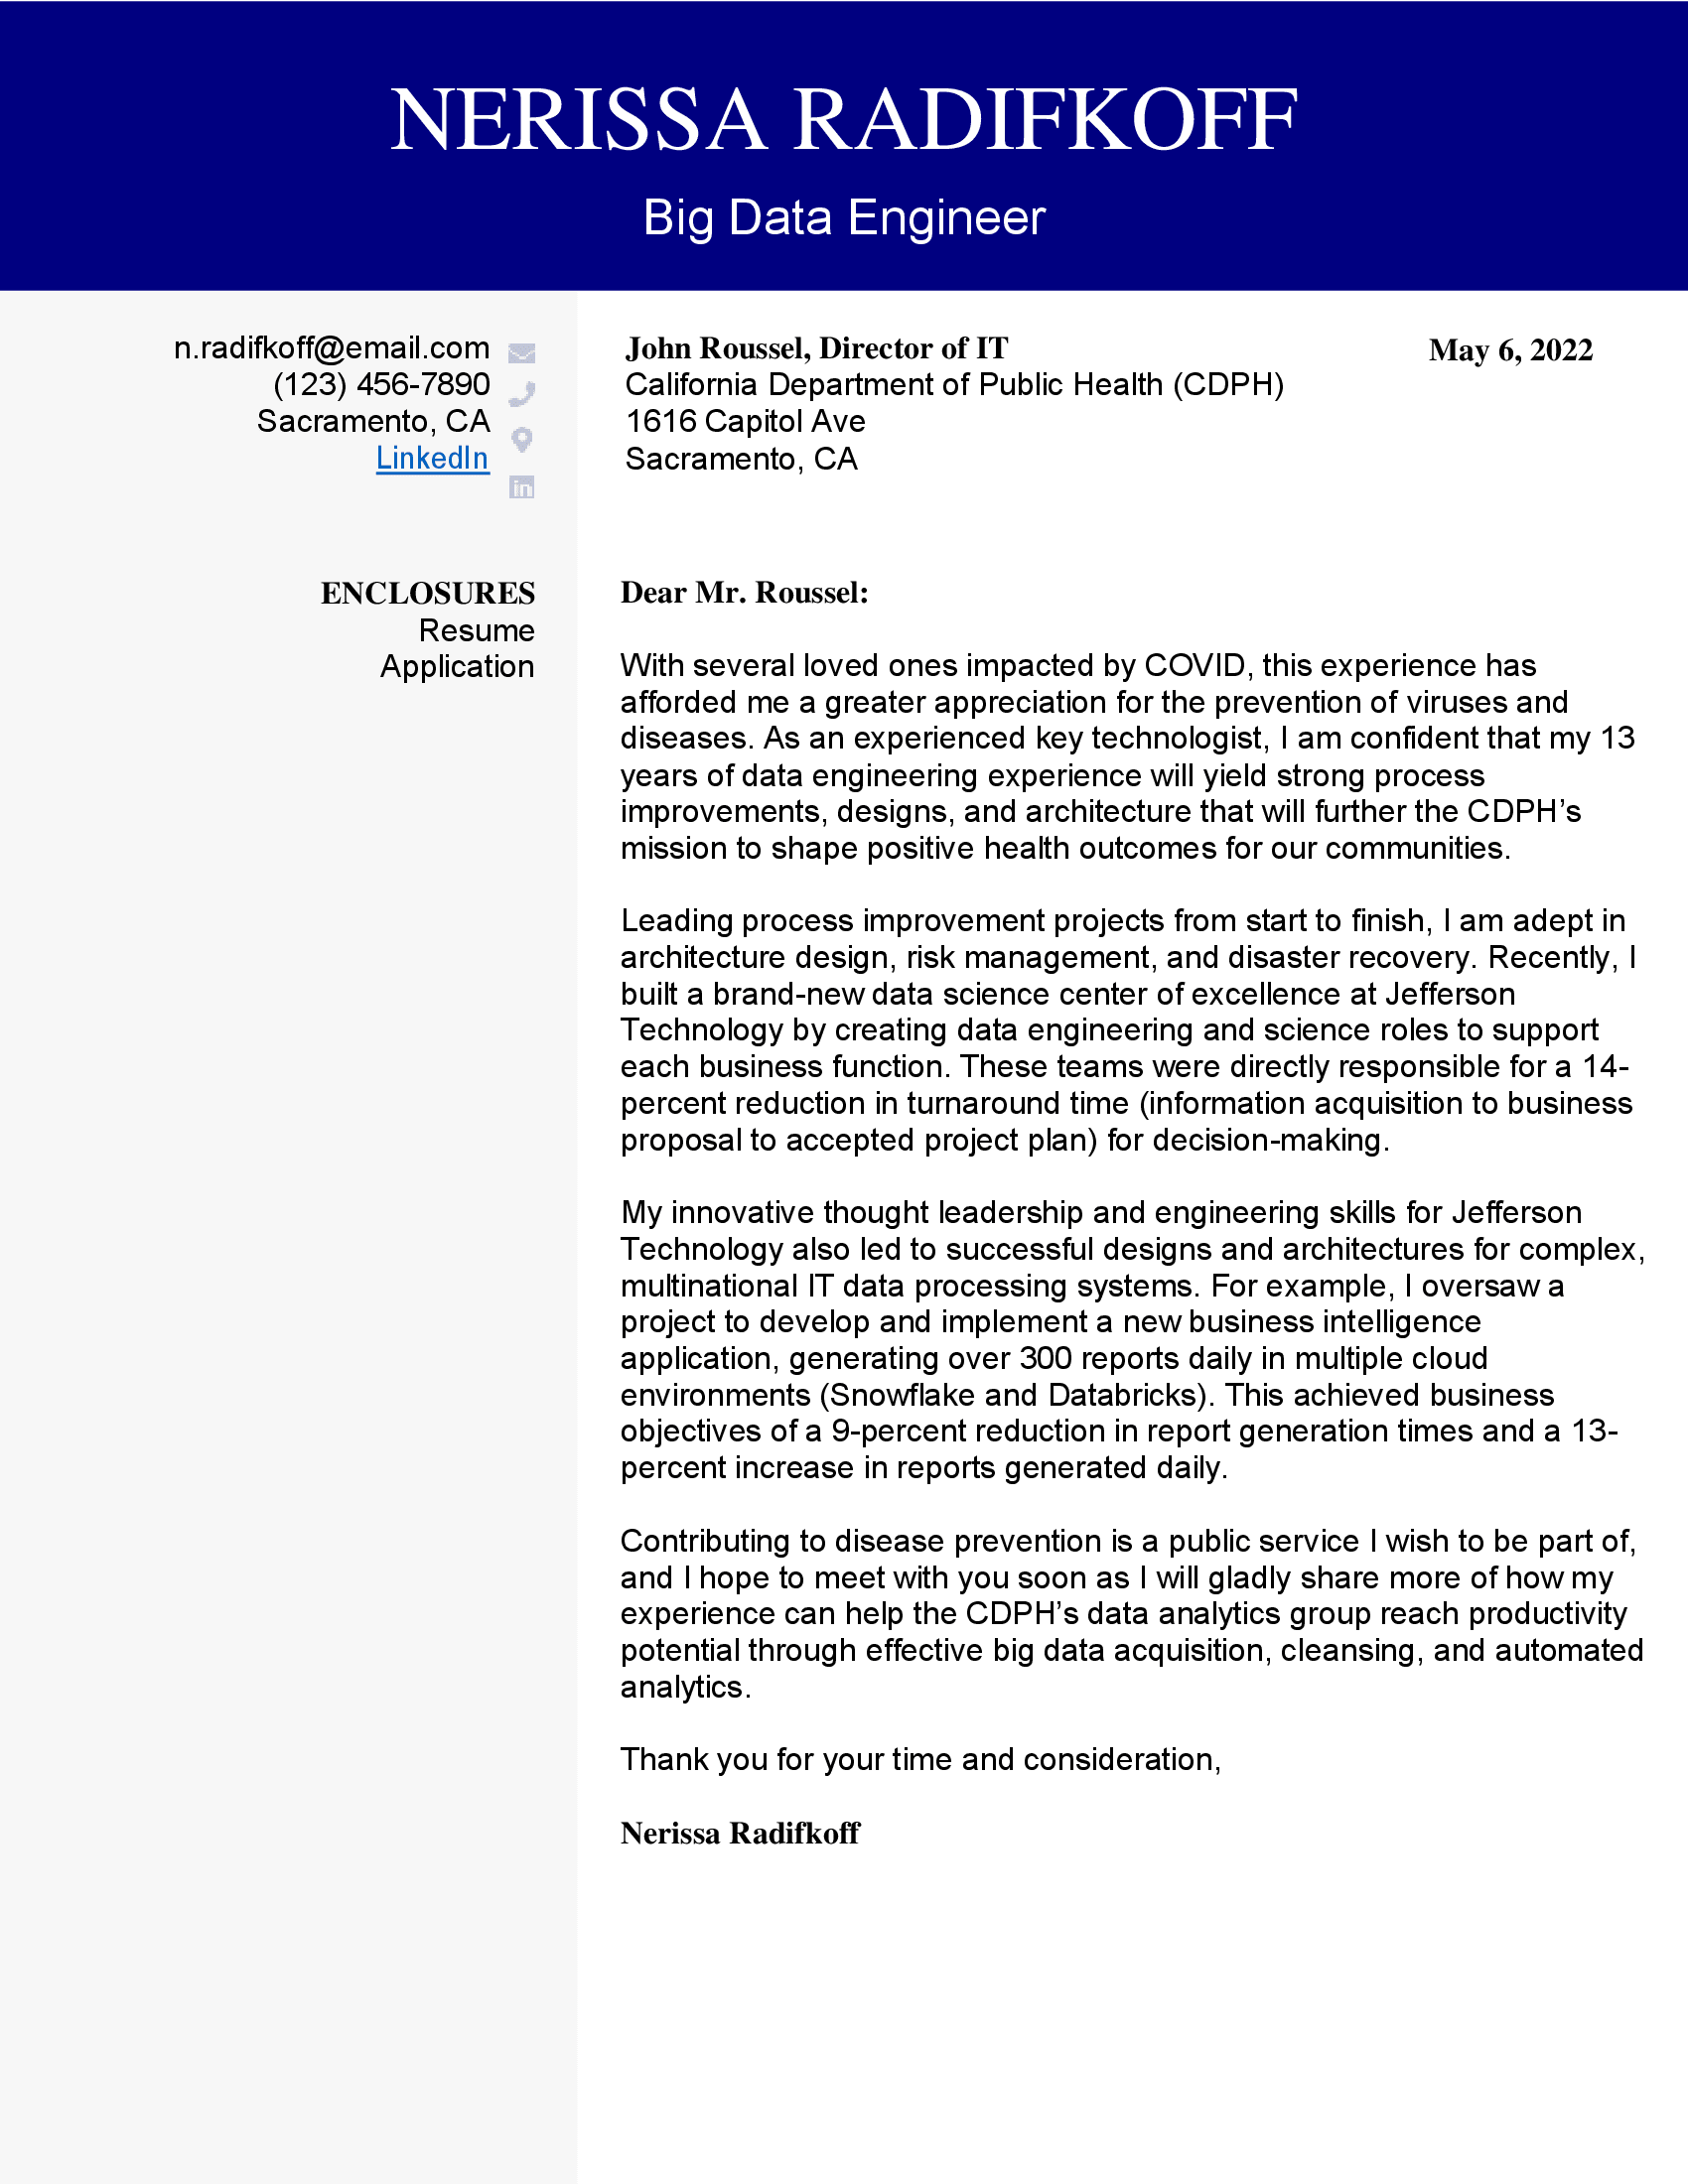 Big data engineer cover letter with blue contact header